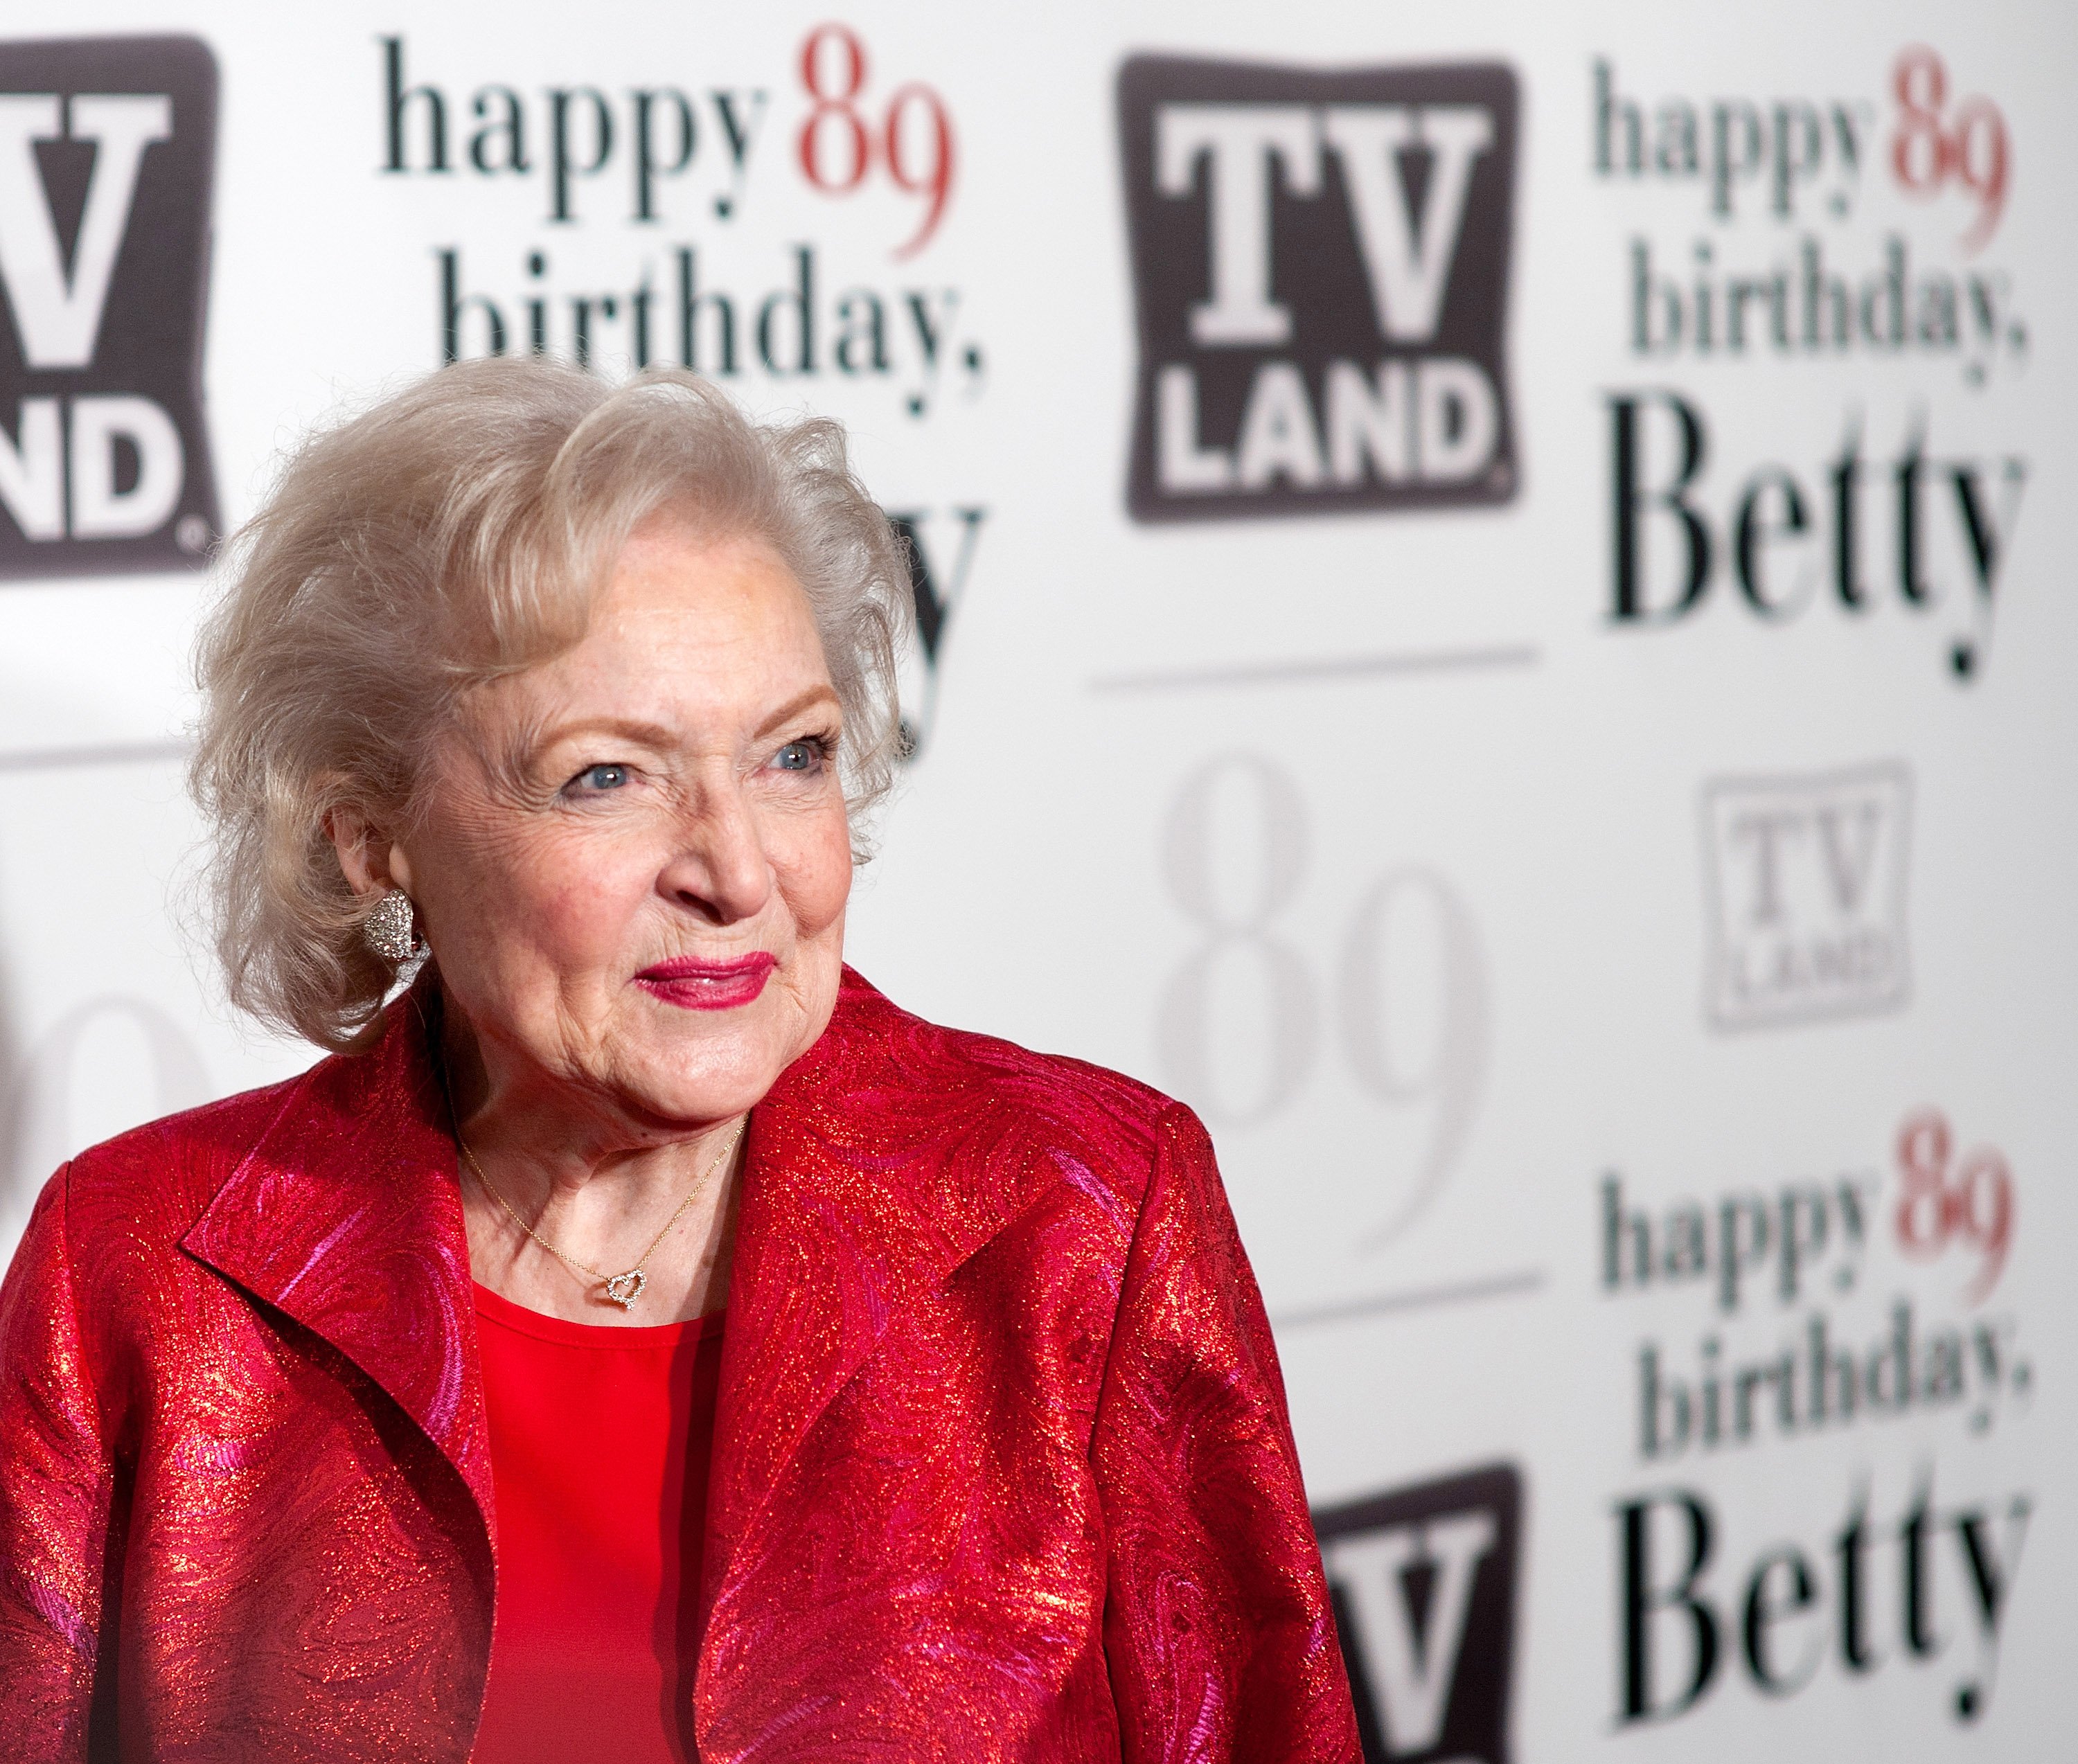 Betty White wears a red outfit during a media event